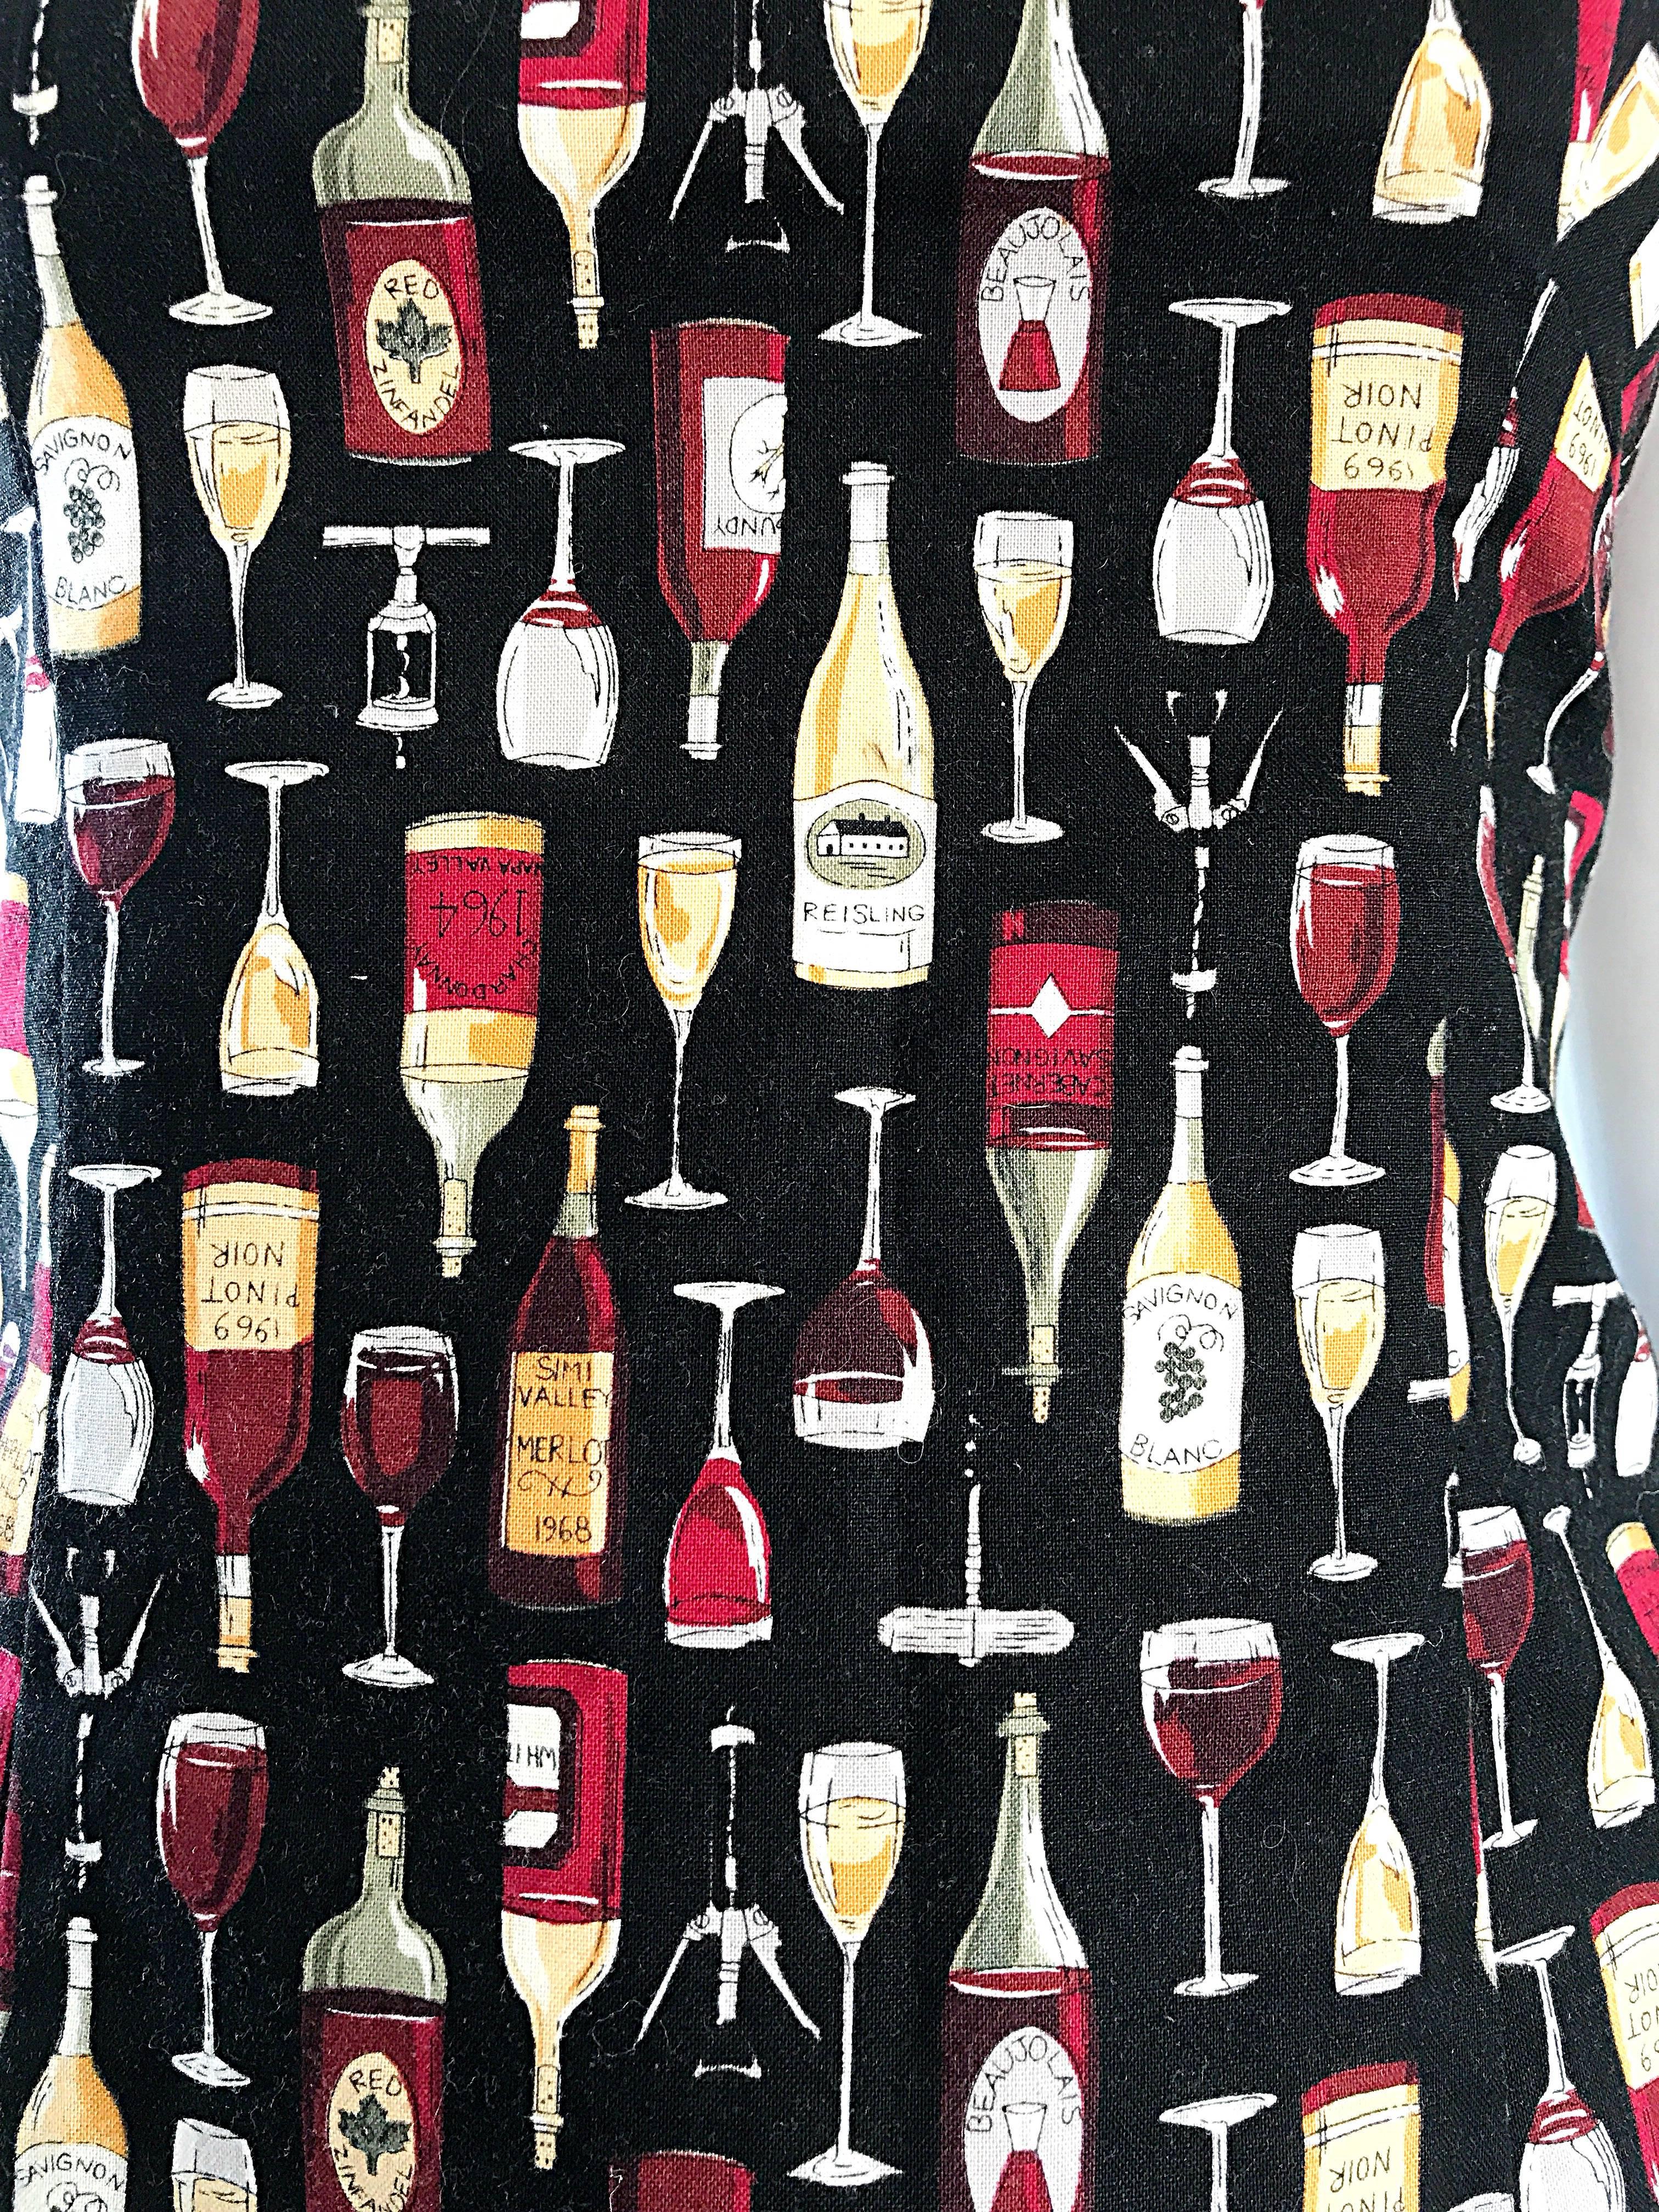 Calling all WINE LOVERS!!! Amazing early 90s novelty print mini dress with an allover print of red and white wine bottles and glasses! The perfect statement piece that looks amazing on! Sleeveless style with a fitted bodice and the slightest flared